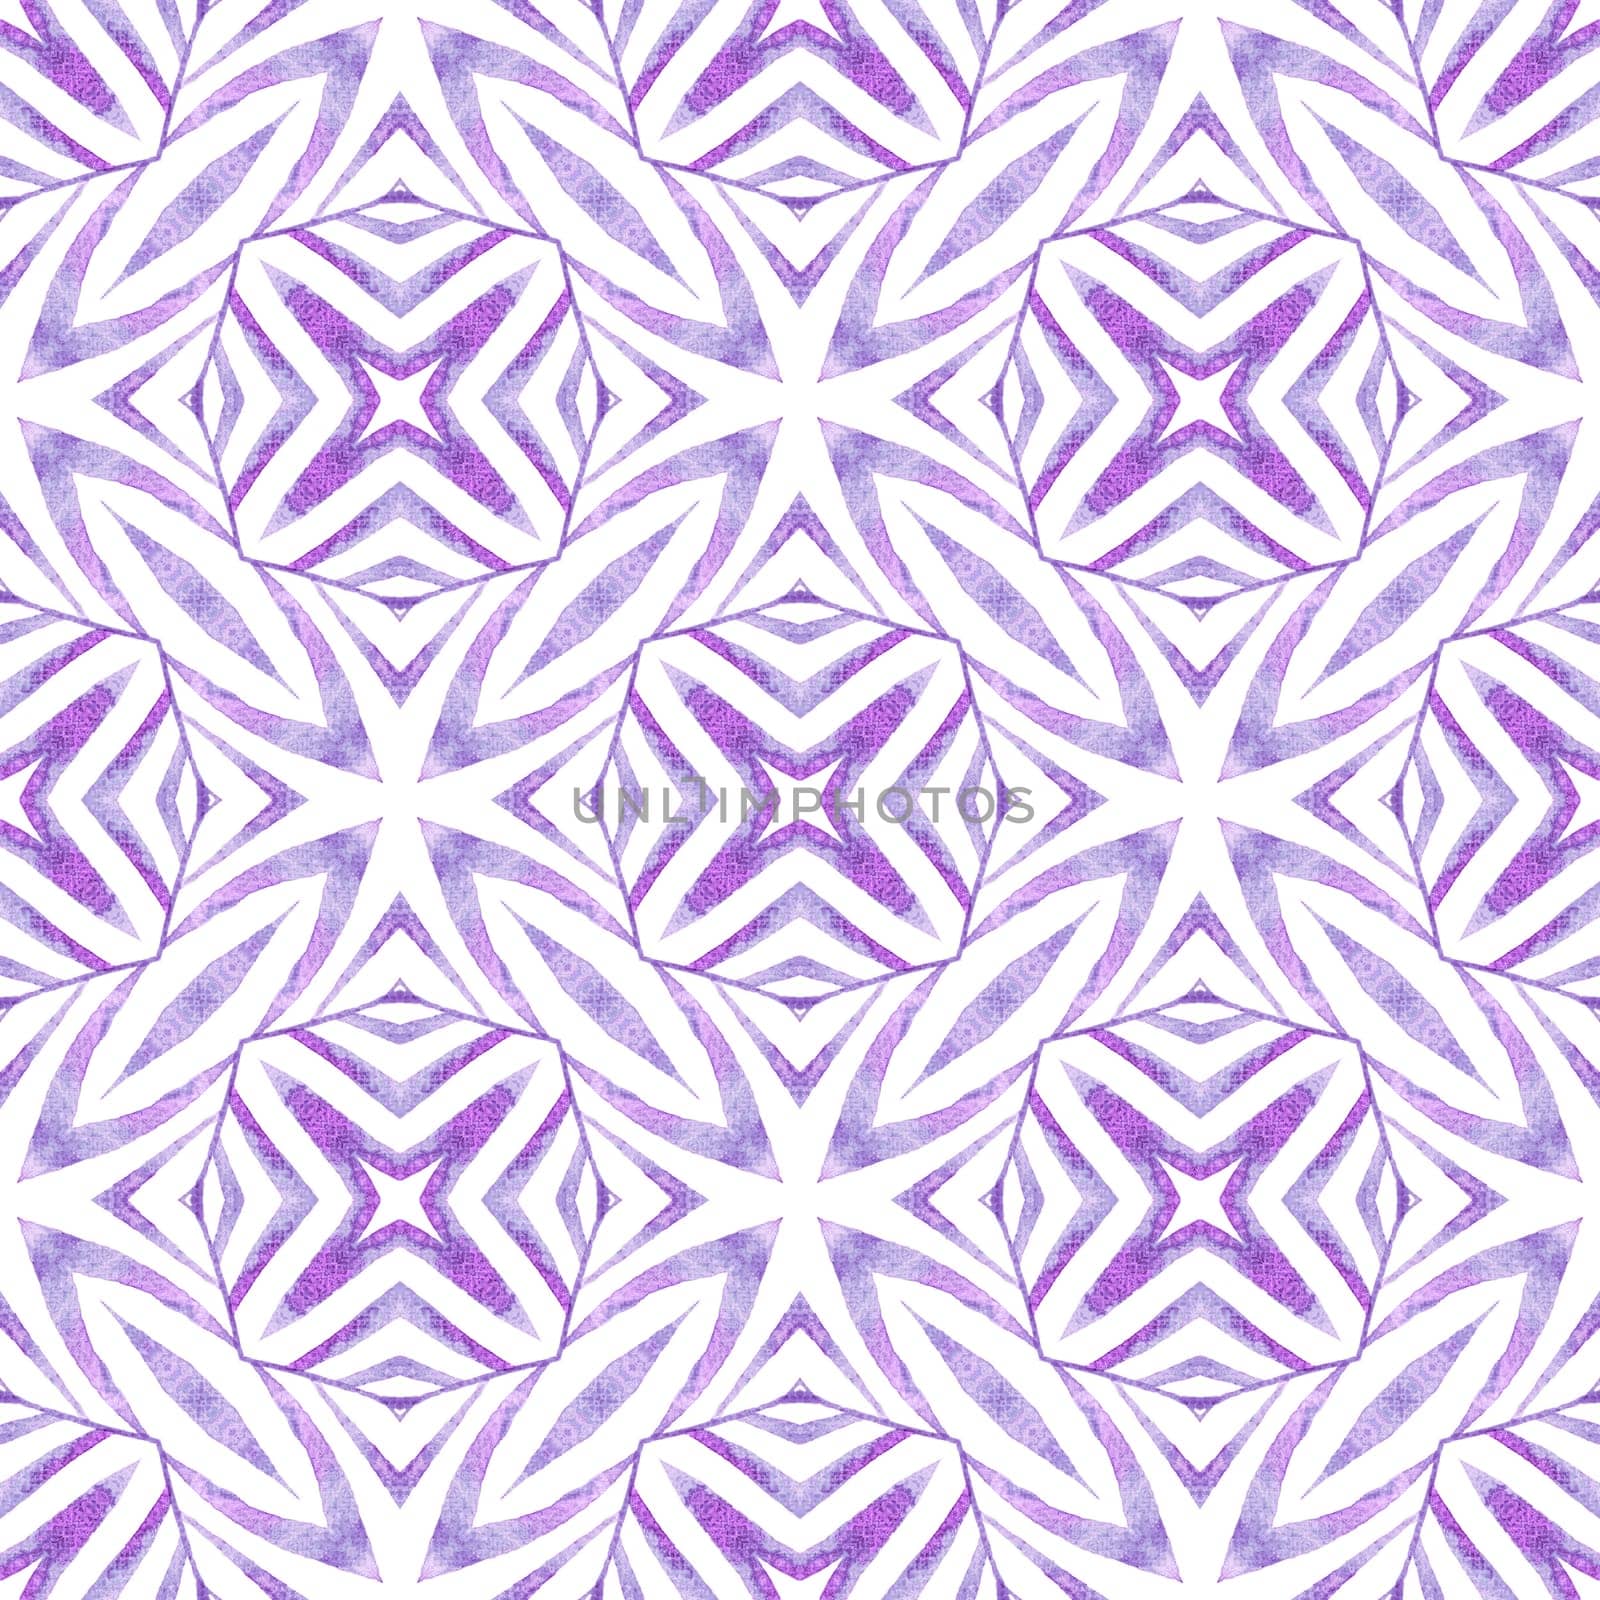 Textile ready fine print, swimwear fabric, wallpaper, wrapping. Purple original boho chic summer design. Hand painted tiled watercolor border. Tiled watercolor background.